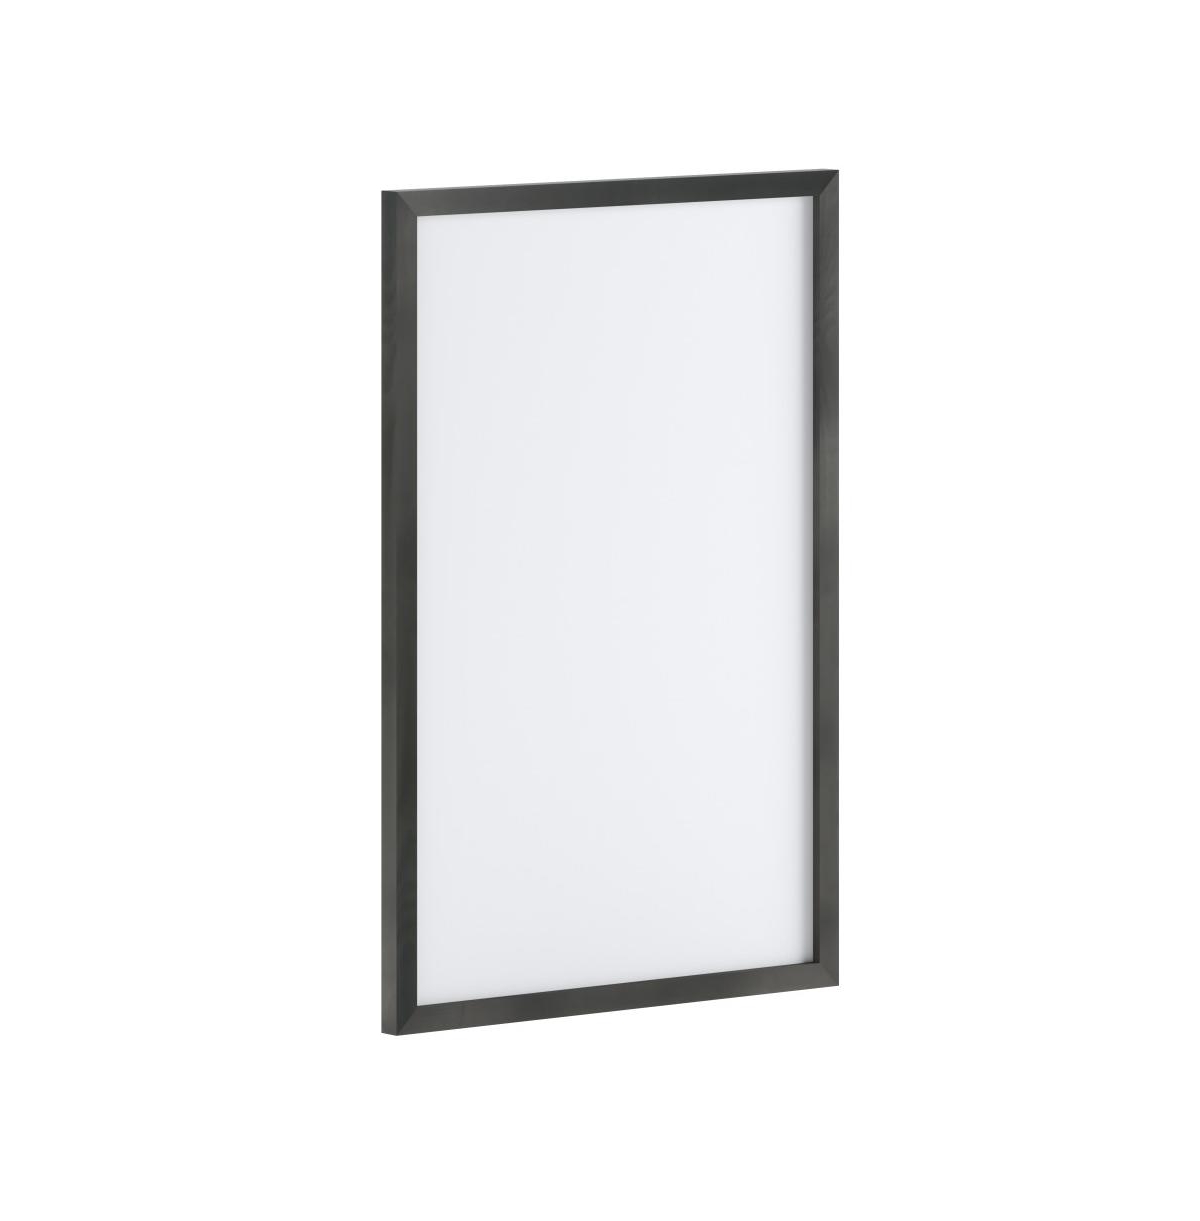 Cilla Magnetic Wall Mounted White Board with Wood Frame - Black